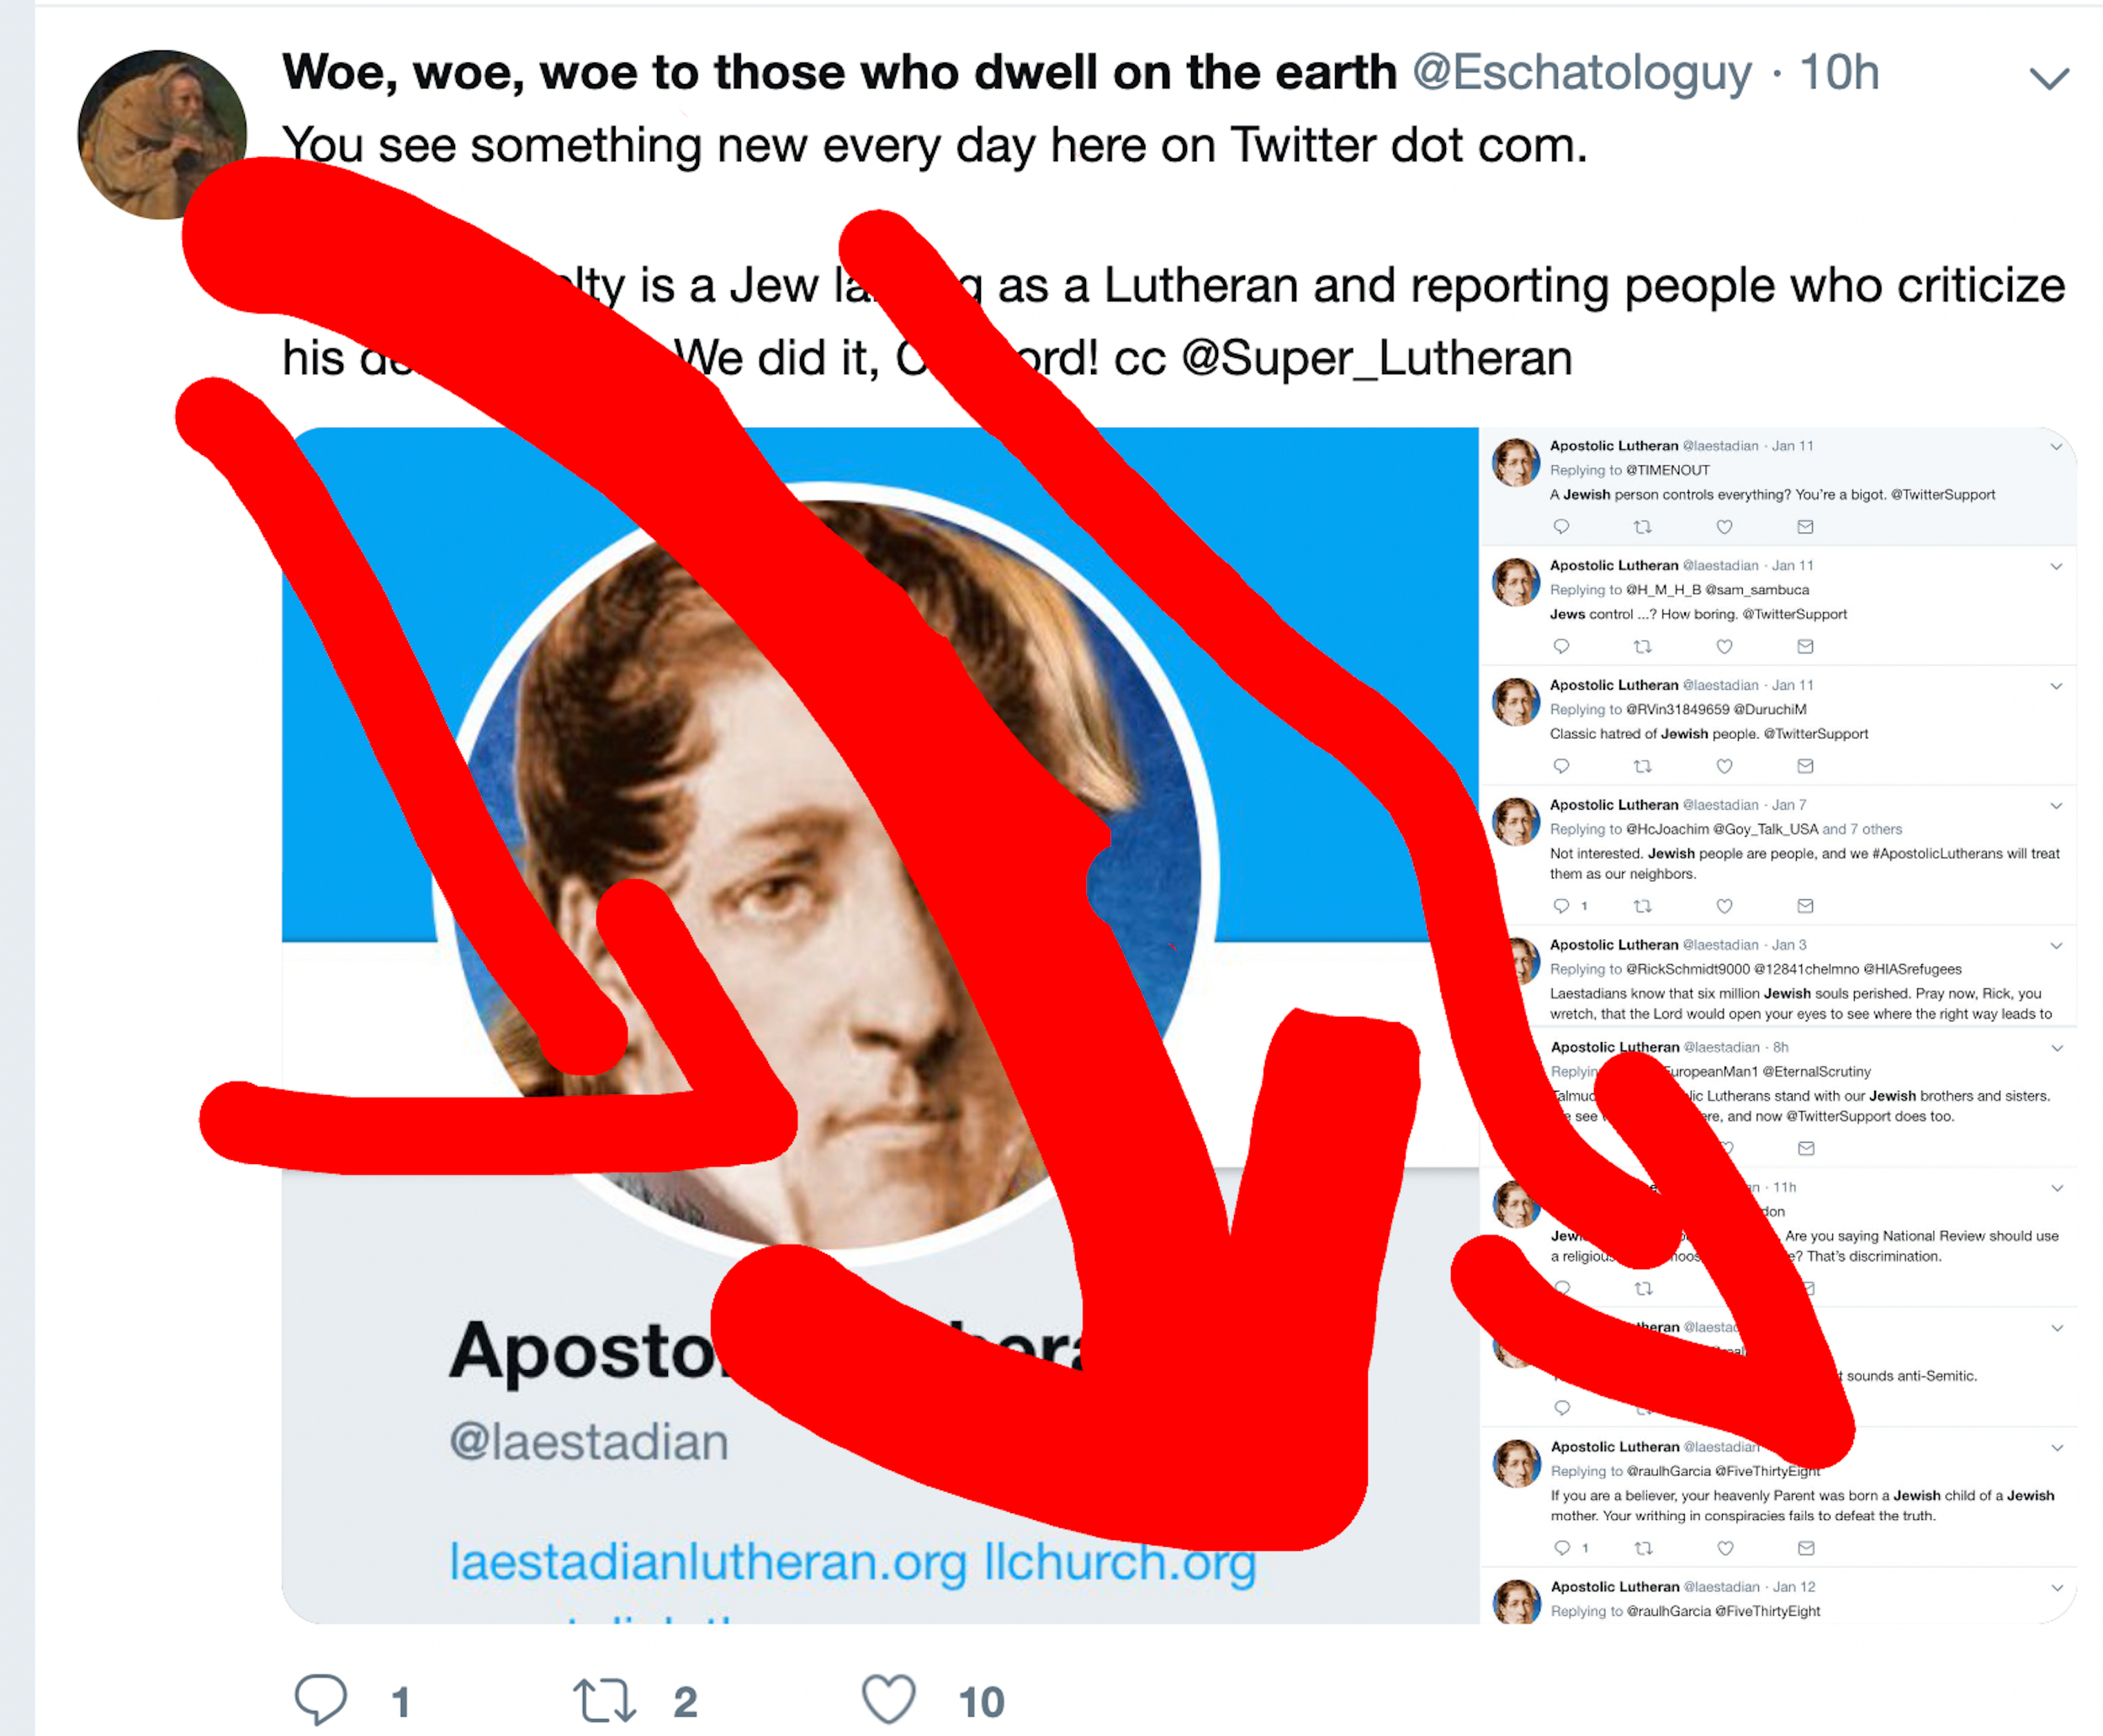 TW: Antisemitism. Woe as Eschatologuy “cc”ing Superlutheran in an antisemitic tweet about a “Jew larping as a Lutheran.” Includes image of @laestadian's Twitter profile and highlights of his tweets about Jewish people.